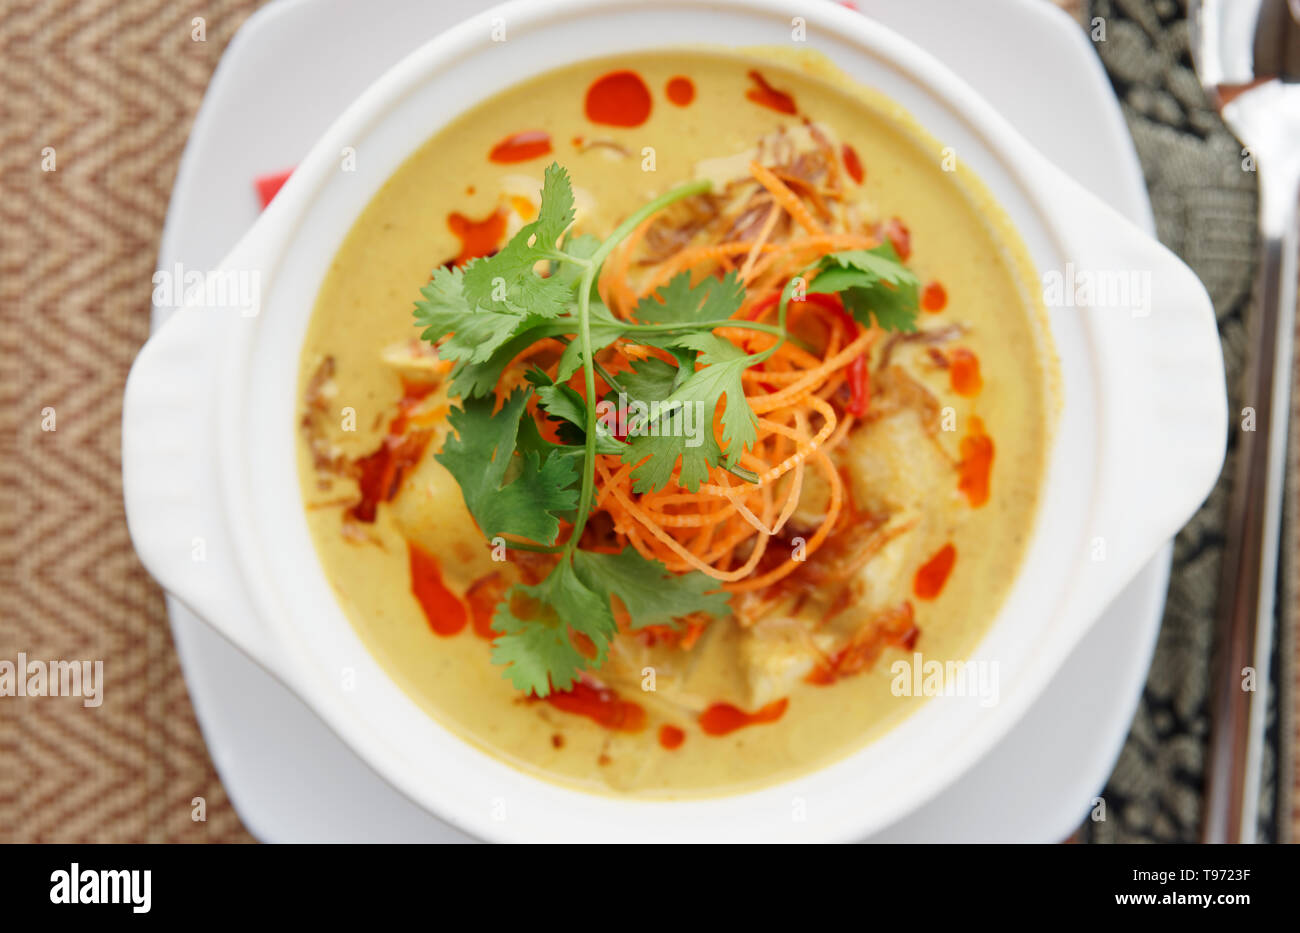 Bowl of Tom Yam spicy curry dish, Thai cuisine Stock Photo